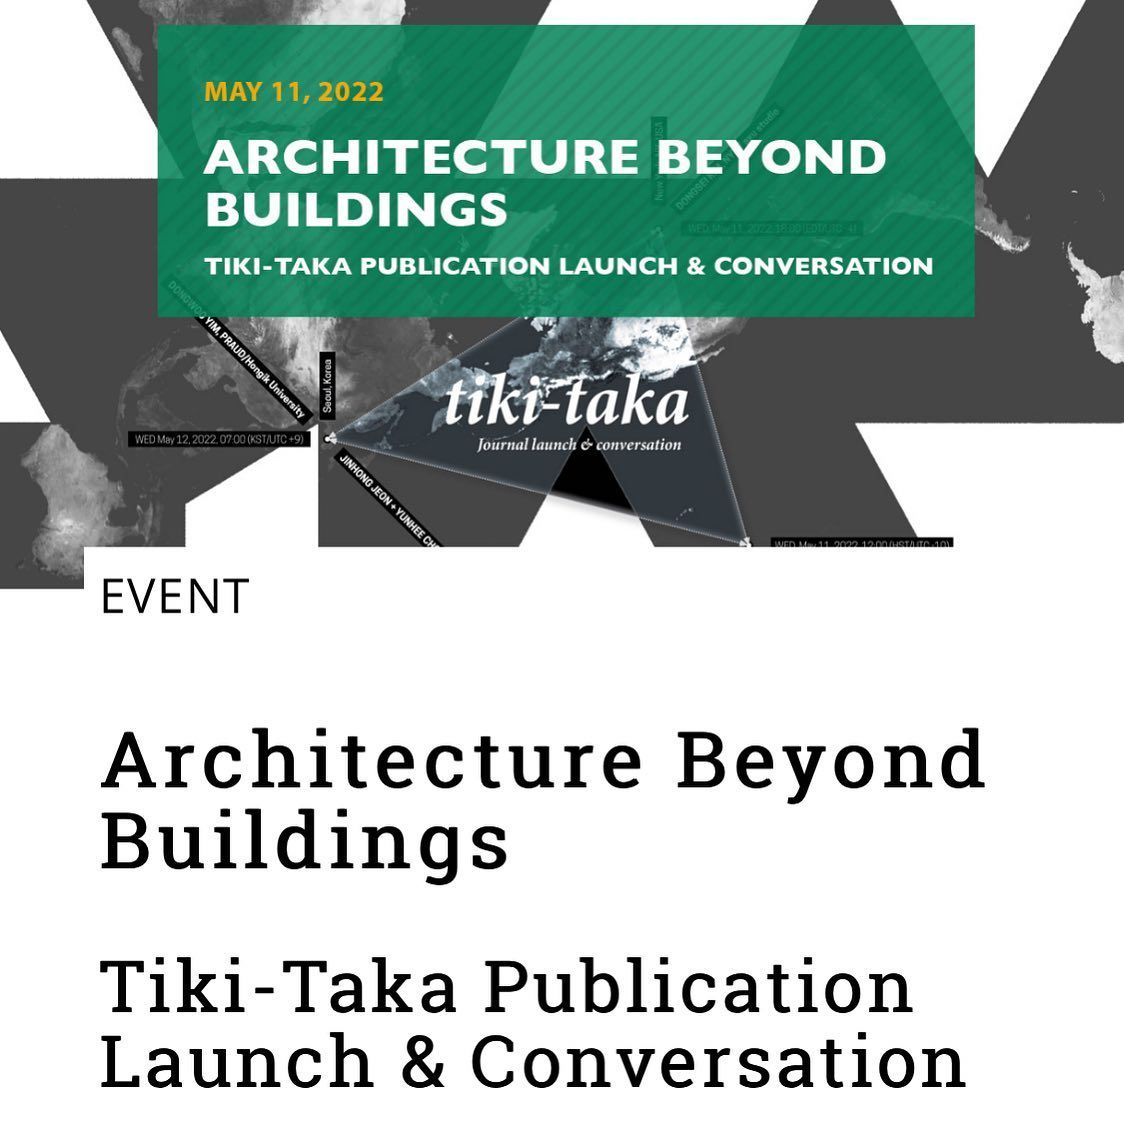 NYIT Architecture Beyond Buildings: Tiki-Taka Publication Launch and Conversation